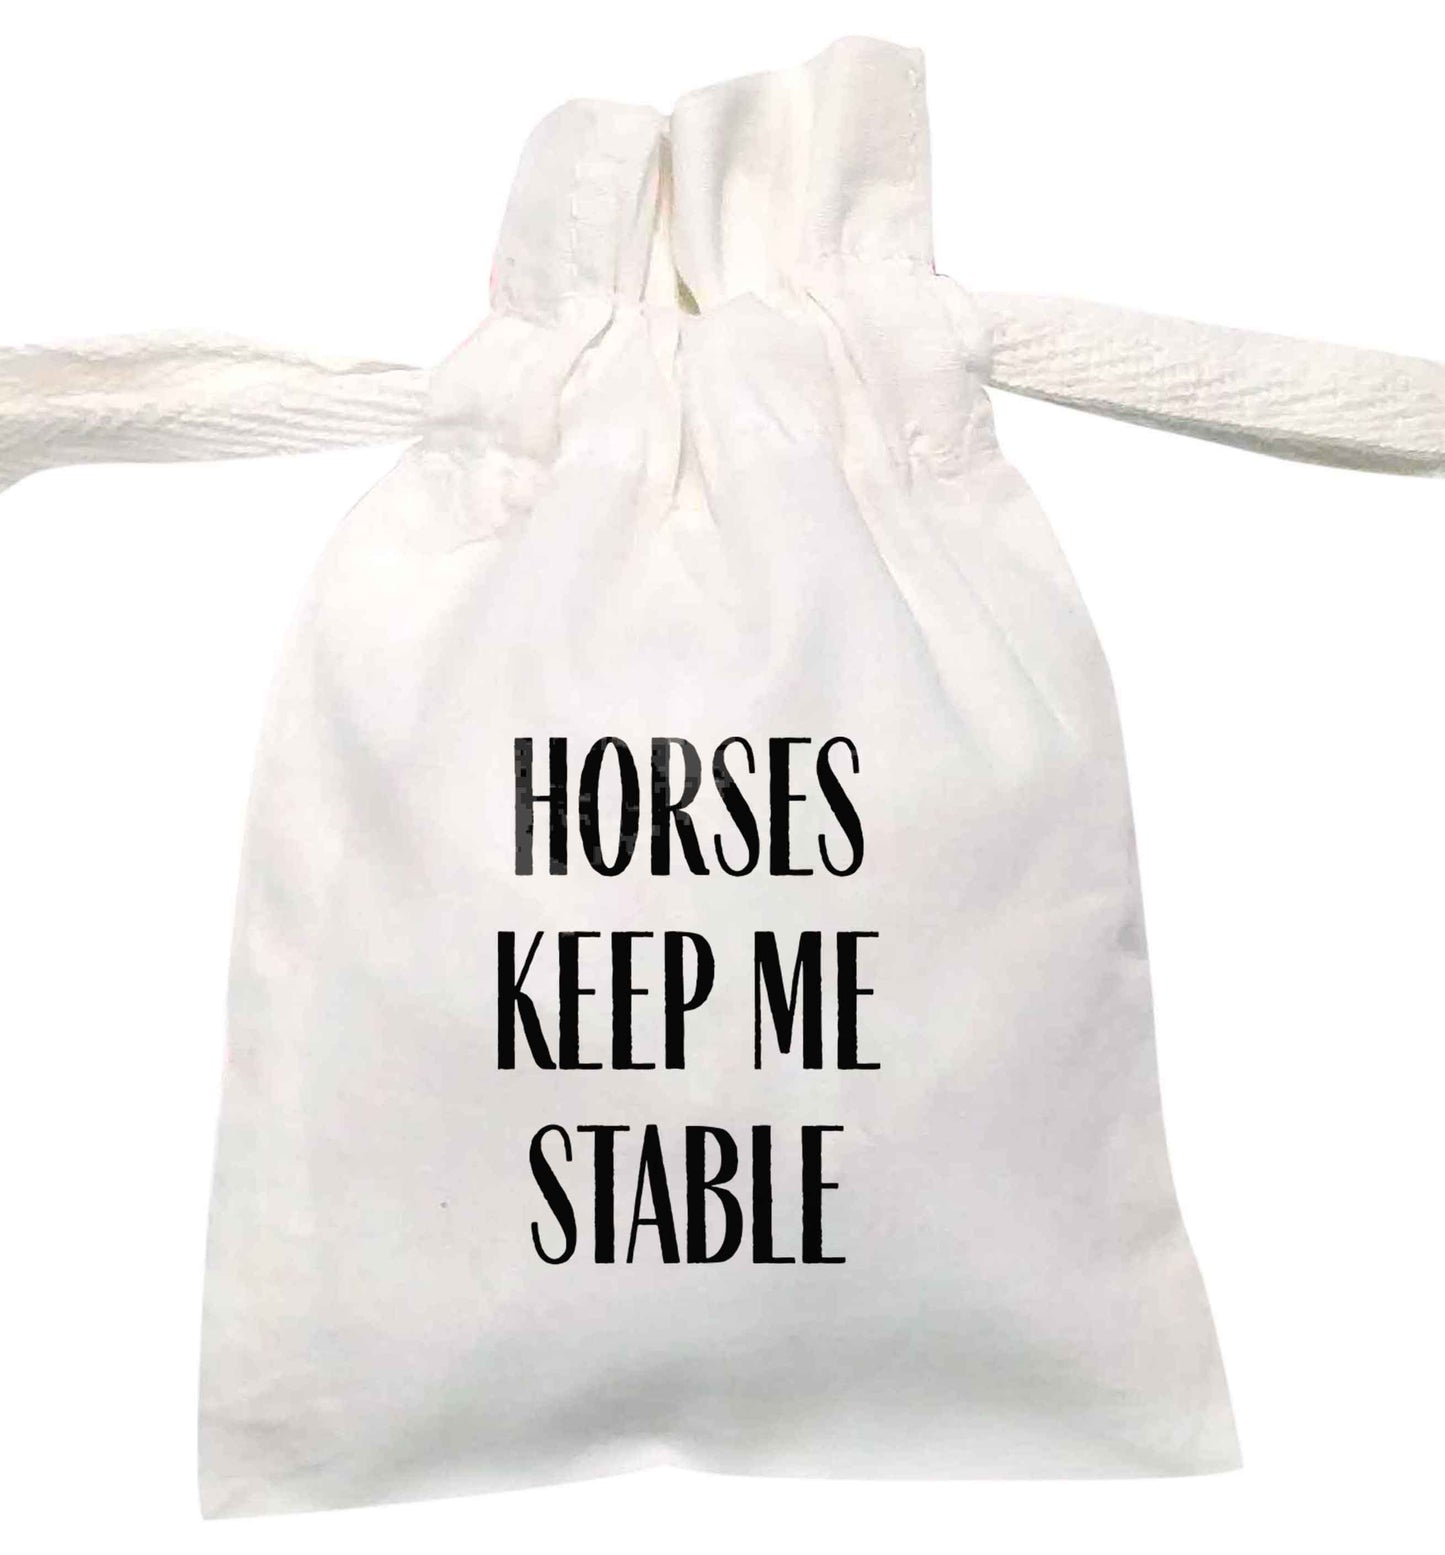 Horses keep me stable | XS - L | Pouch / Drawstring bag / Sack | Organic Cotton | Bulk discounts available!